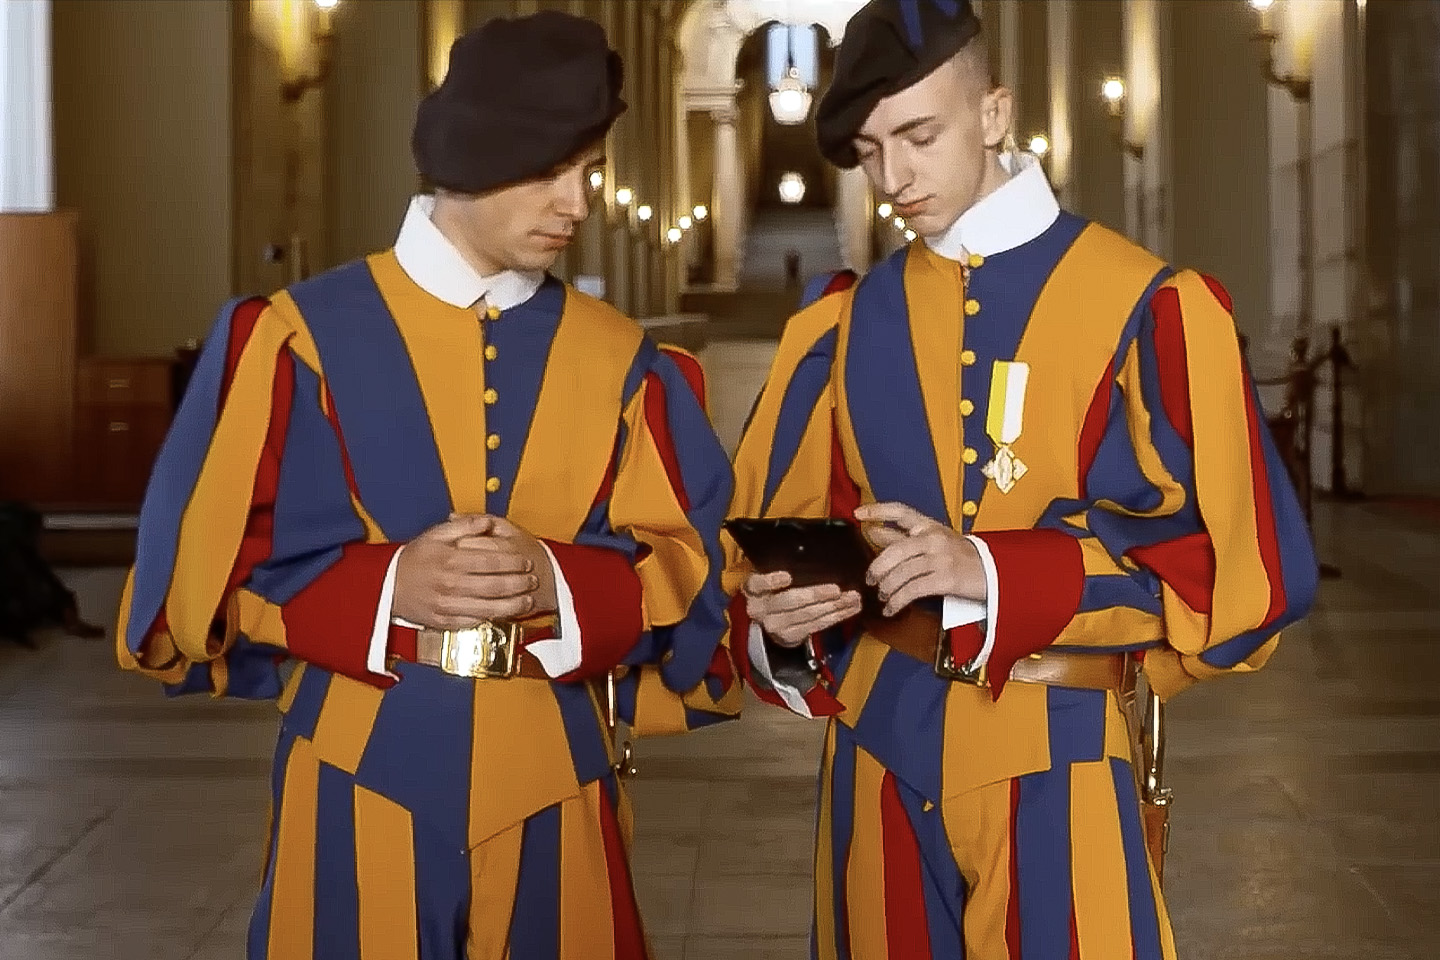 Samsung Knox Suite and the Pontifical Swiss Guard